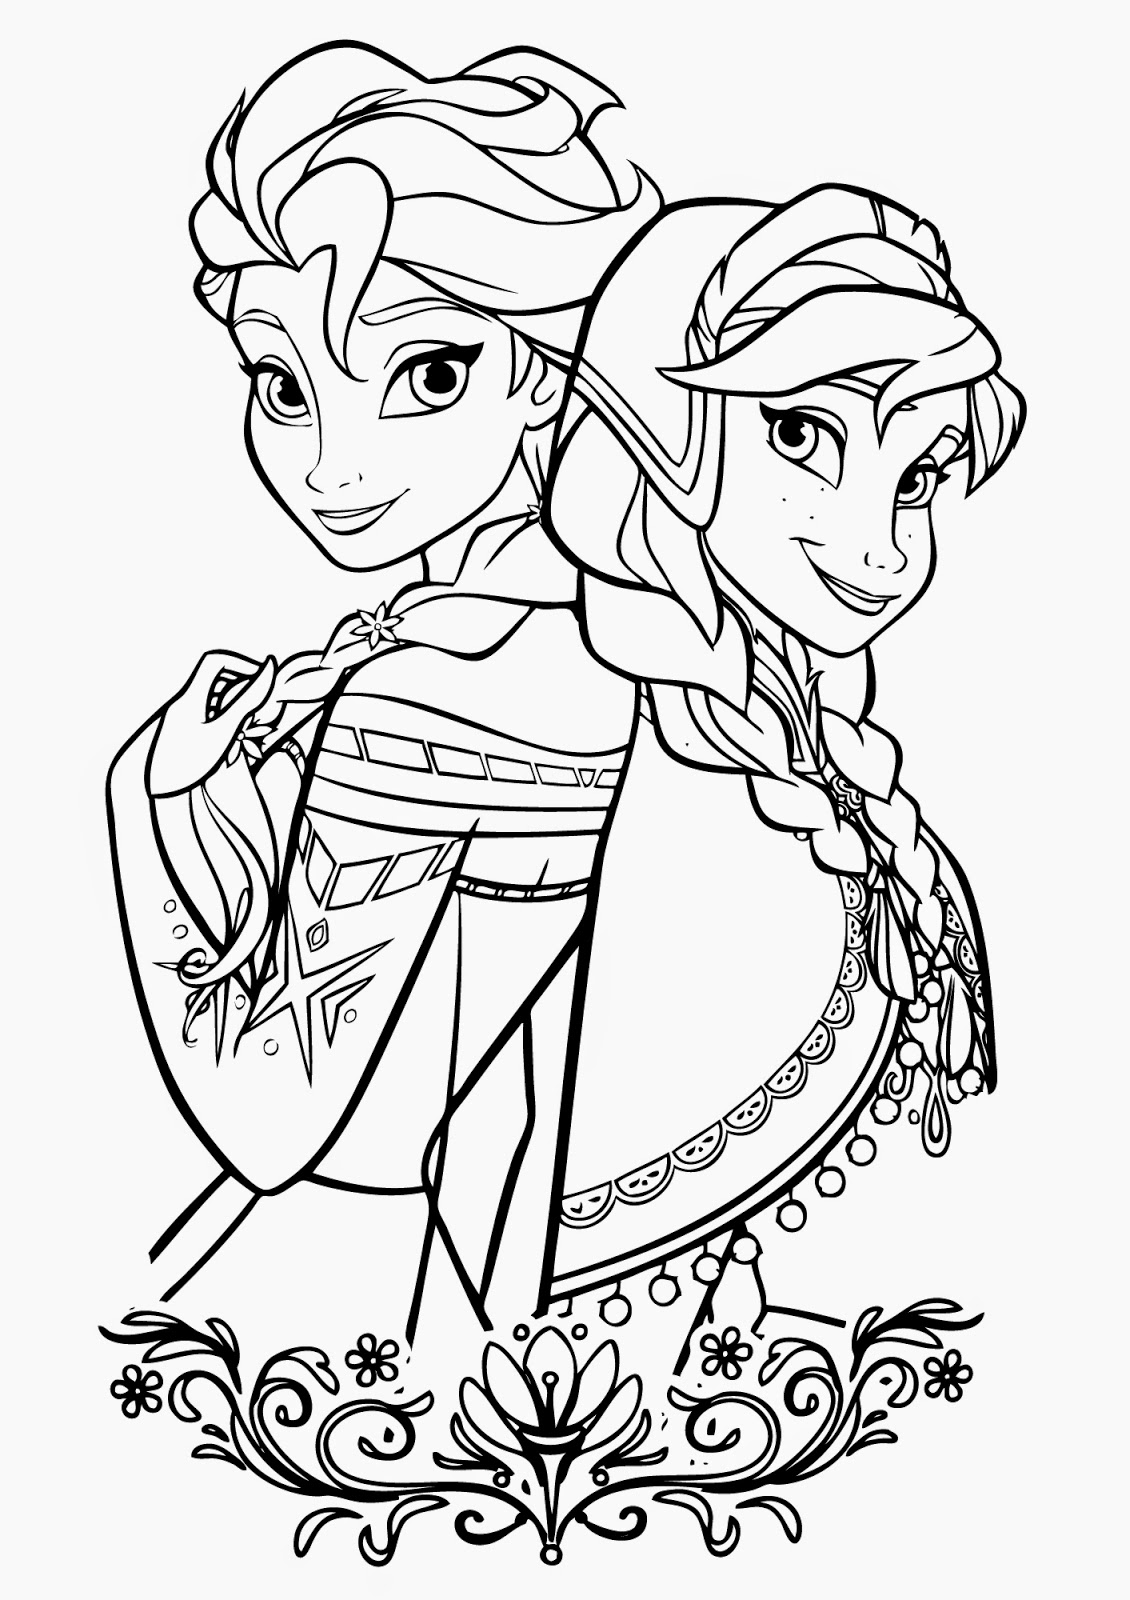 Download Free Printable Elsa Coloring Pages for Kids - Best Coloring Pages For Kids